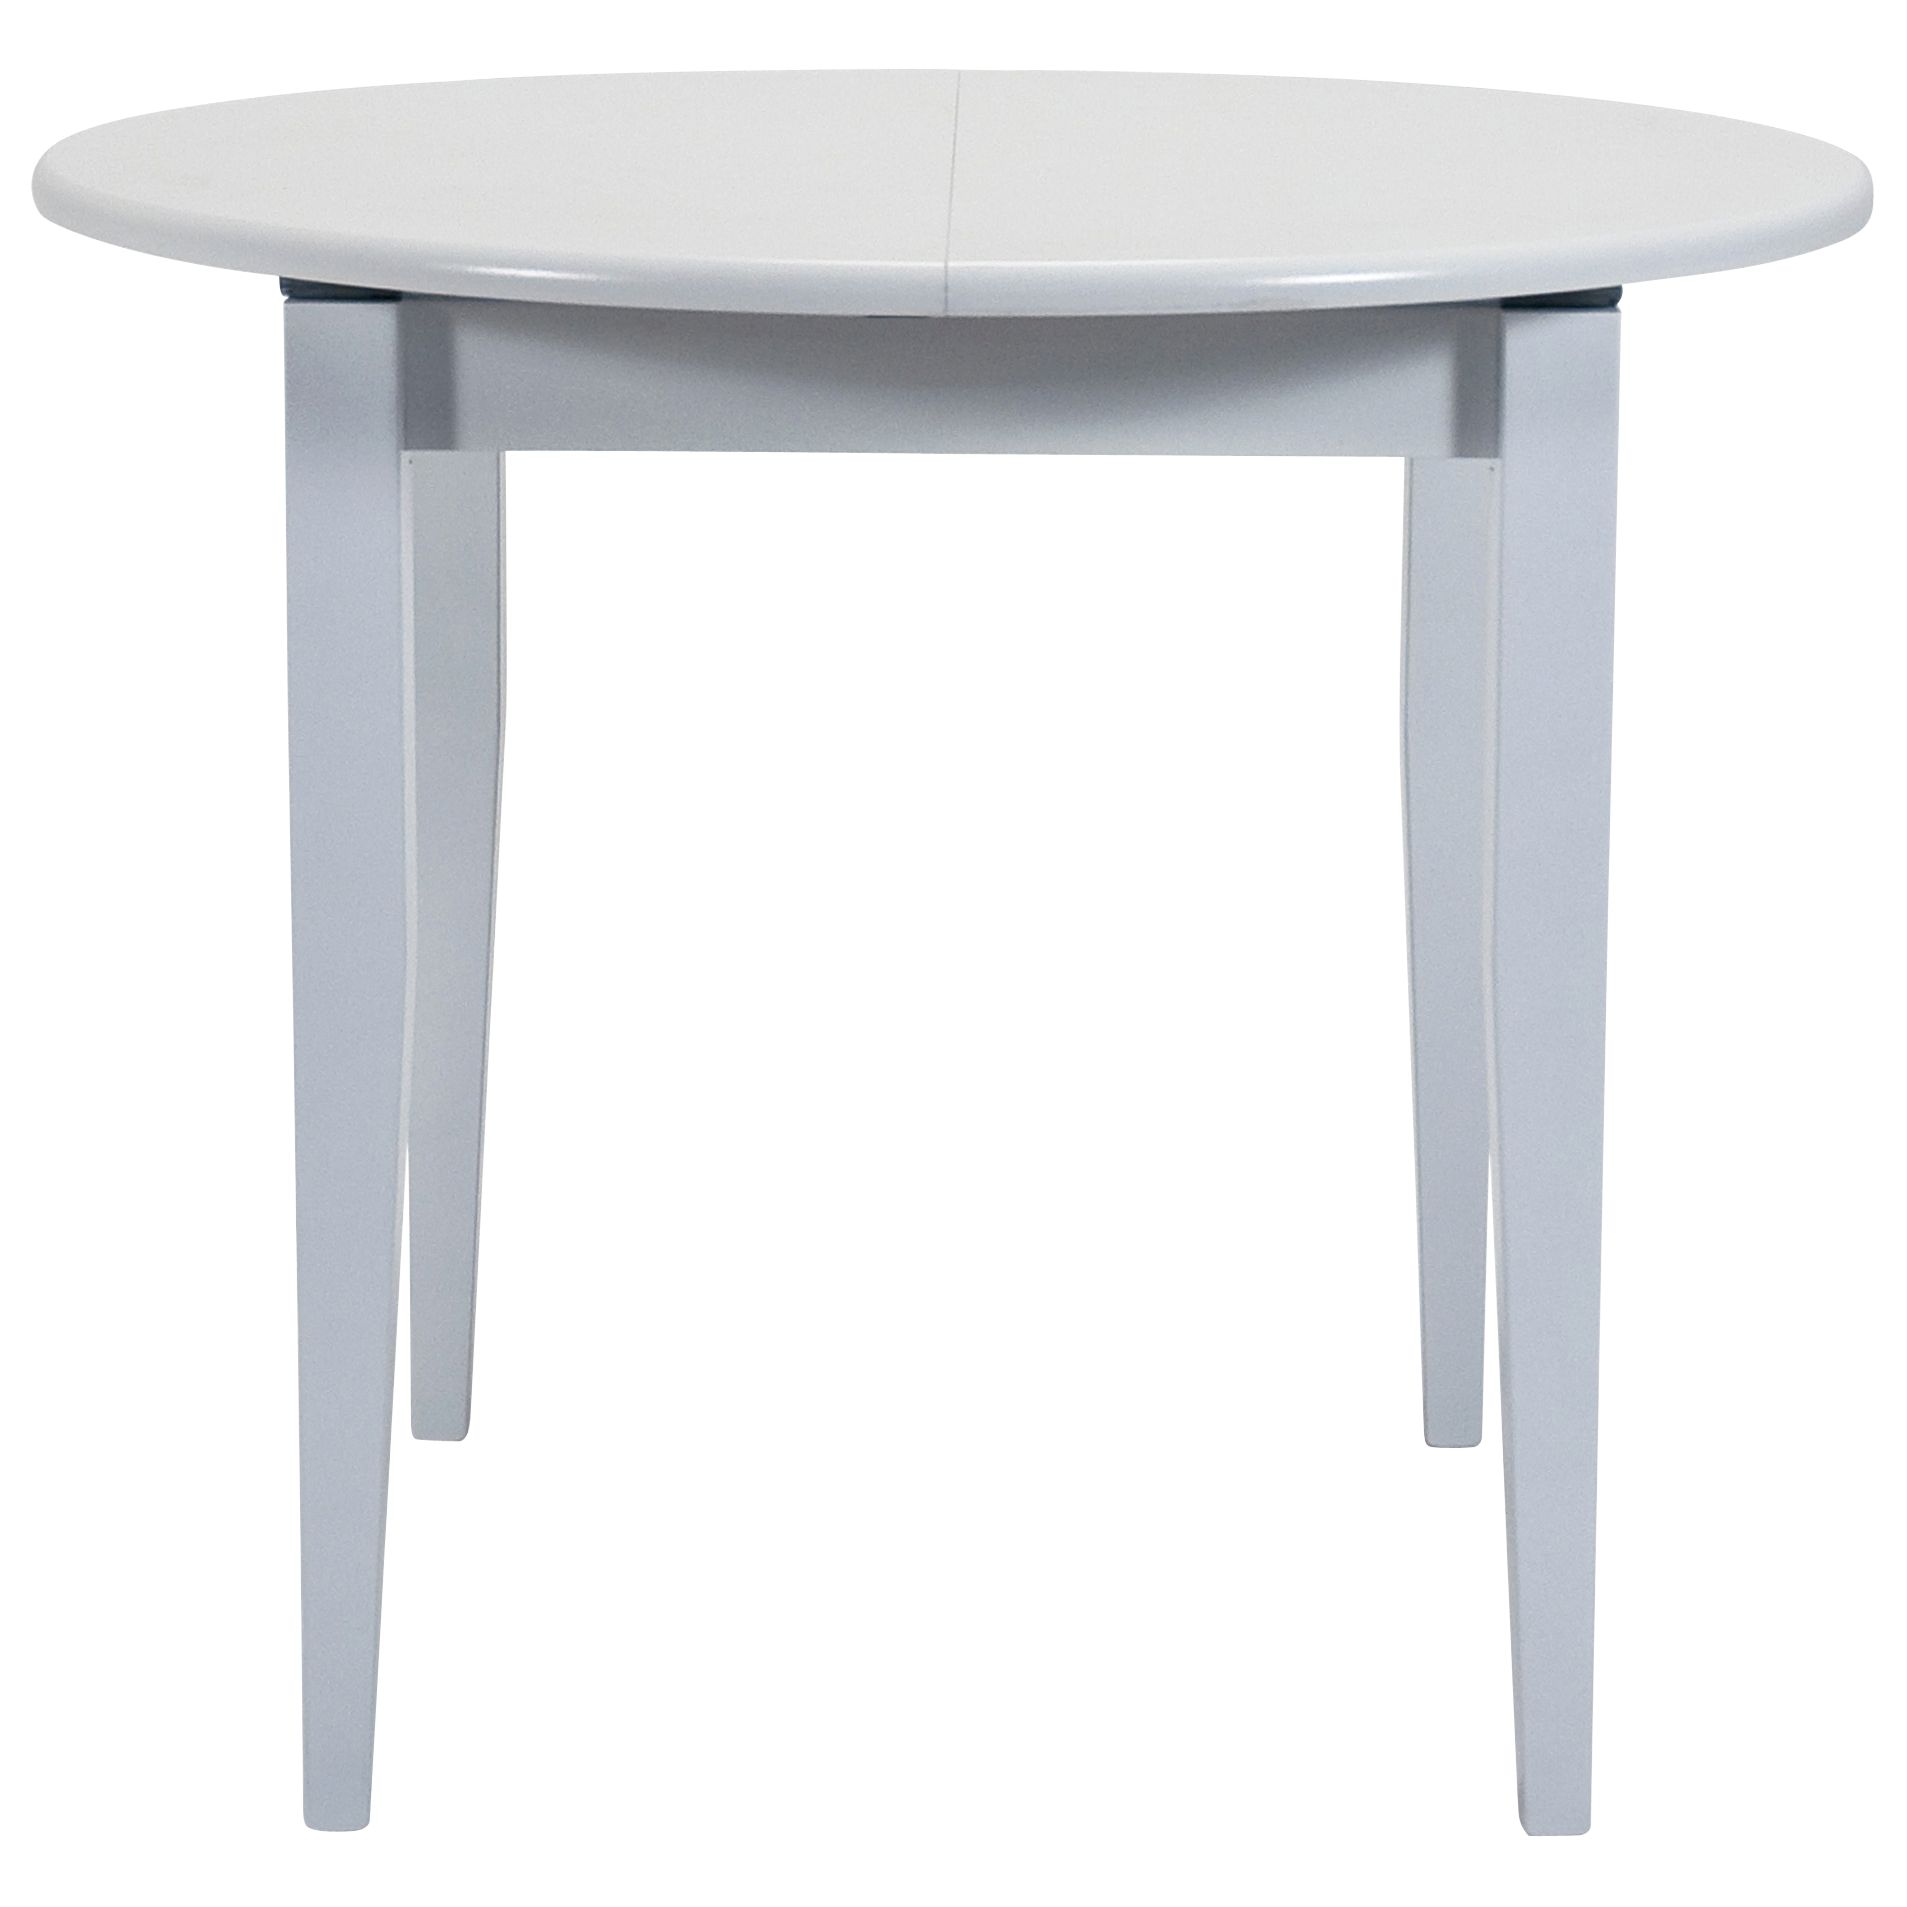 Lacock Round Extending Dining Table,